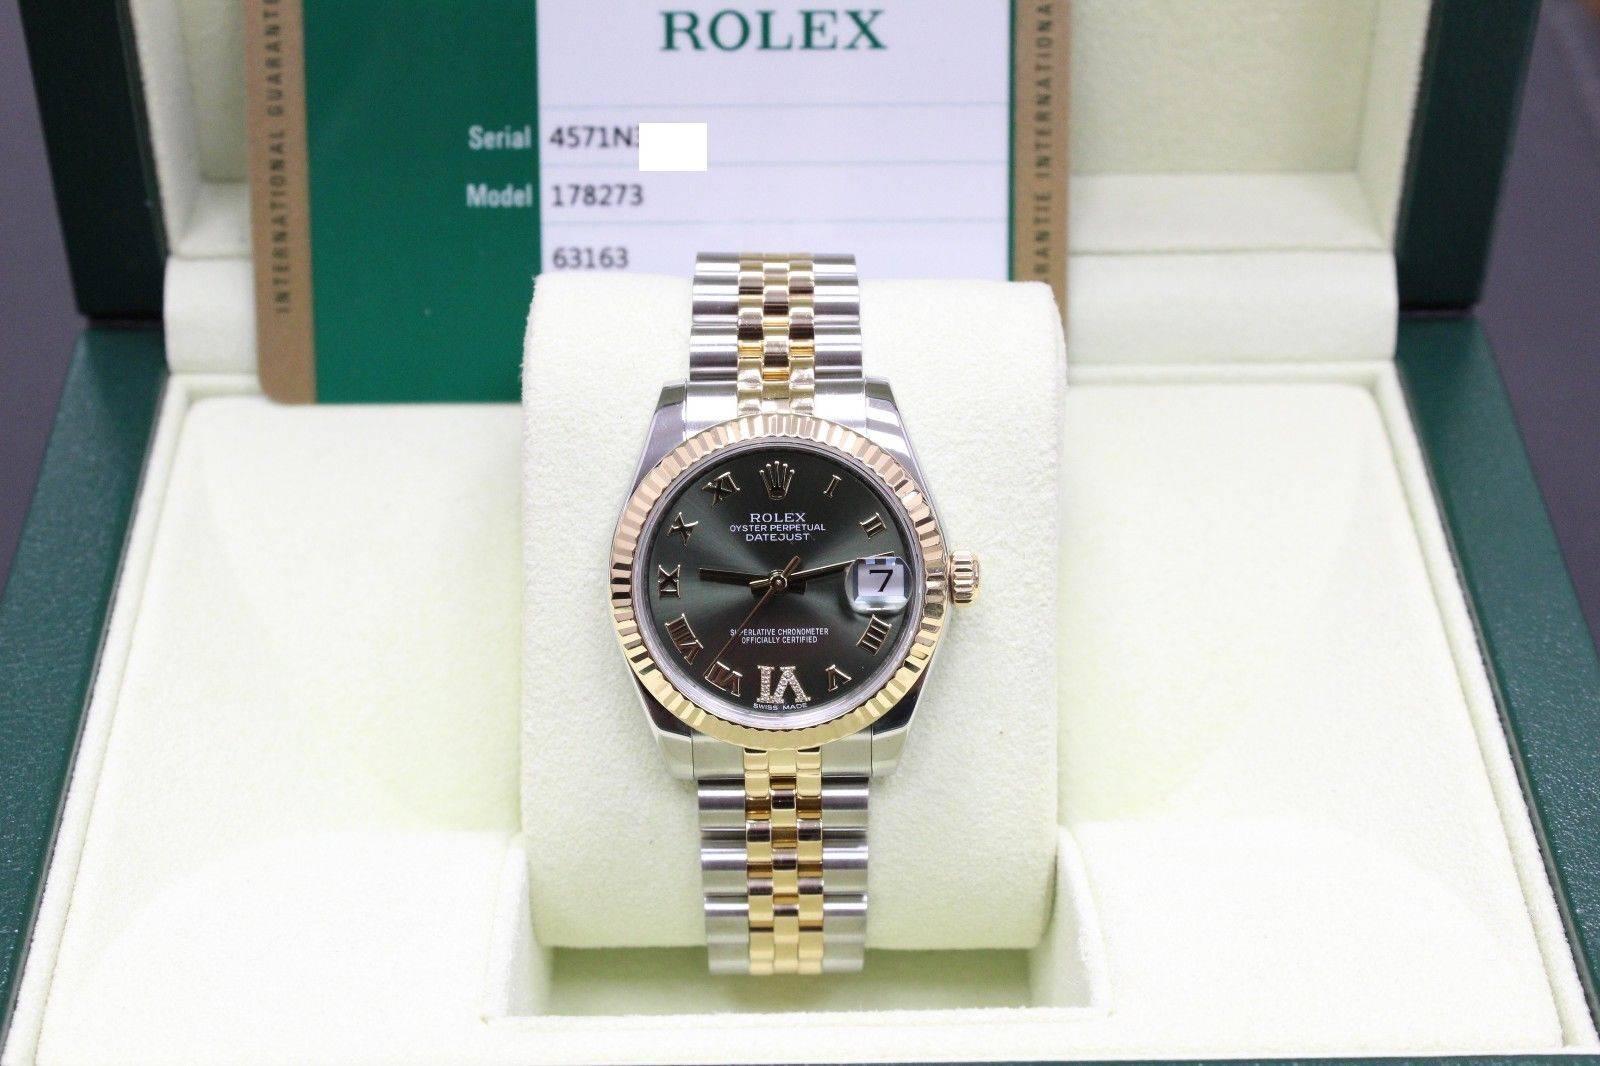 Style Number: 178273
Serial: 4571N***
Year: 2015
Model: Datejust
Case Material: 31mm
Band: 18K Yellow Gold & Stainless Steel 
Bezel: 18K Yellow Gold
Dial: Olive Green Roman Numeral VI Diamond Hour Marker 
Face: Sapphire Crystal 
Case Size: